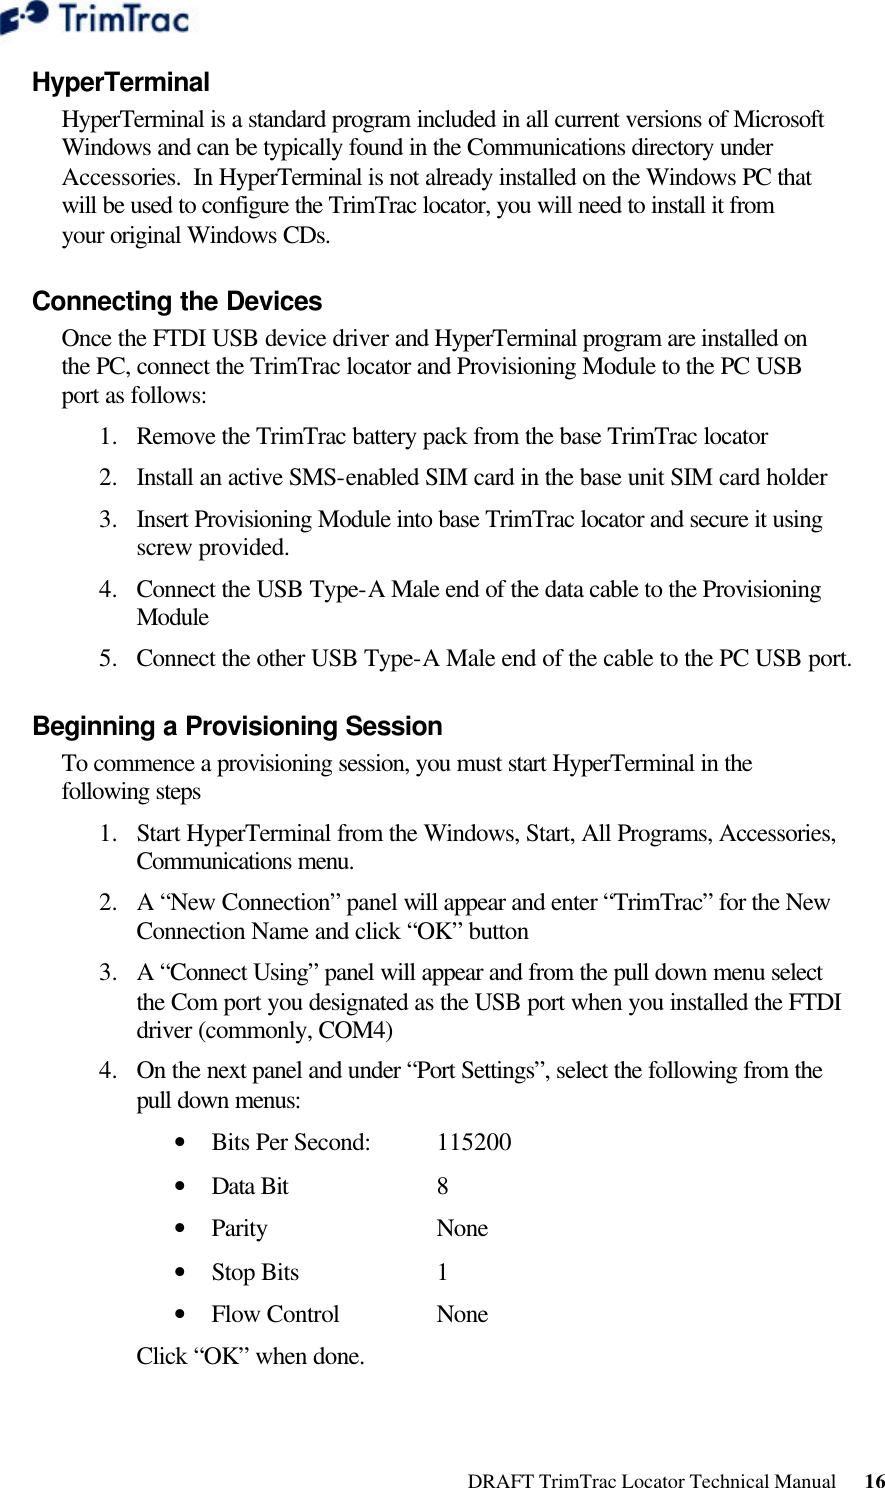  DRAFT TrimTrac Locator Technical Manual      16 HyperTerminal HyperTerminal is a standard program included in all current versions of Microsoft Windows and can be typically found in the Communications directory under Accessories.  In HyperTerminal is not already installed on the Windows PC that will be used to configure the TrimTrac locator, you will need to install it from your original Windows CDs. Connecting the Devices Once the FTDI USB device driver and HyperTerminal program are installed on the PC, connect the TrimTrac locator and Provisioning Module to the PC USB port as follows: 1.  Remove the TrimTrac battery pack from the base TrimTrac locator 2.  Install an active SMS-enabled SIM card in the base unit SIM card holder 3.  Insert Provisioning Module into base TrimTrac locator and secure it using screw provided. 4.  Connect the USB Type-A Male end of the data cable to the Provisioning Module 5.  Connect the other USB Type-A Male end of the cable to the PC USB port. Beginning a Provisioning Session To commence a provisioning session, you must start HyperTerminal in the following steps 1.  Start HyperTerminal from the Windows, Start, All Programs, Accessories, Communications menu. 2.  A “New Connection” panel will appear and enter “TrimTrac” for the New Connection Name and click “OK” button 3.  A “Connect Using” panel will appear and from the pull down menu select the Com port you designated as the USB port when you installed the FTDI driver (commonly, COM4) 4.  On the next panel and under “Port Settings”, select the following from the pull down menus: • Bits Per Second:  115200 • Data Bit    8 • Parity   None • Stop Bits    1 • Flow Control    None Click “OK” when done. 